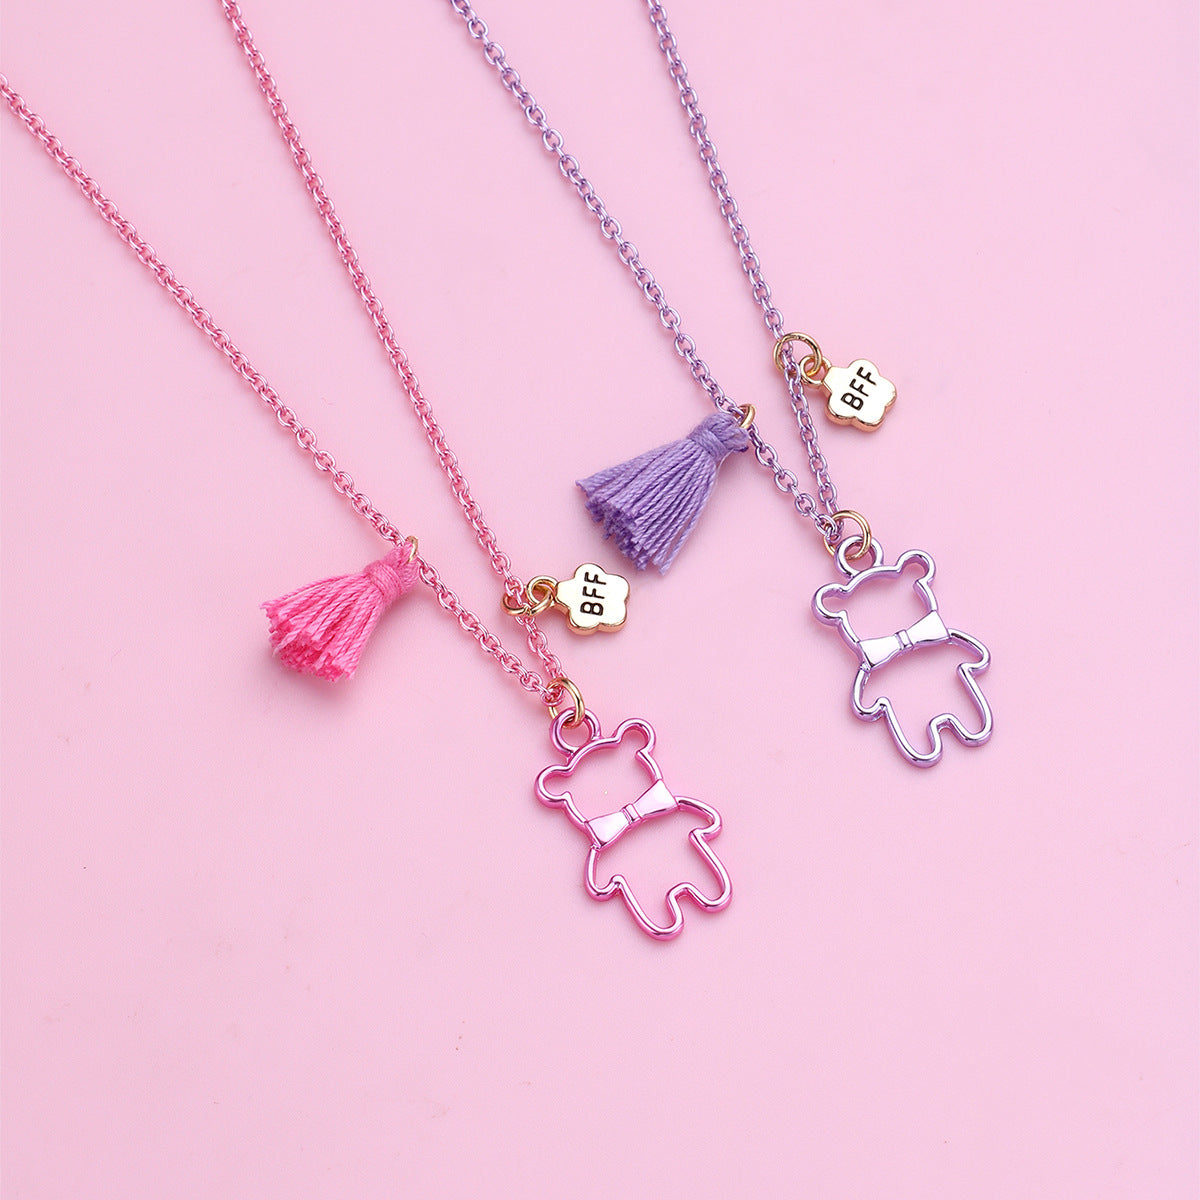 Bff Necklaces Birthday Gift Set for Best Friends